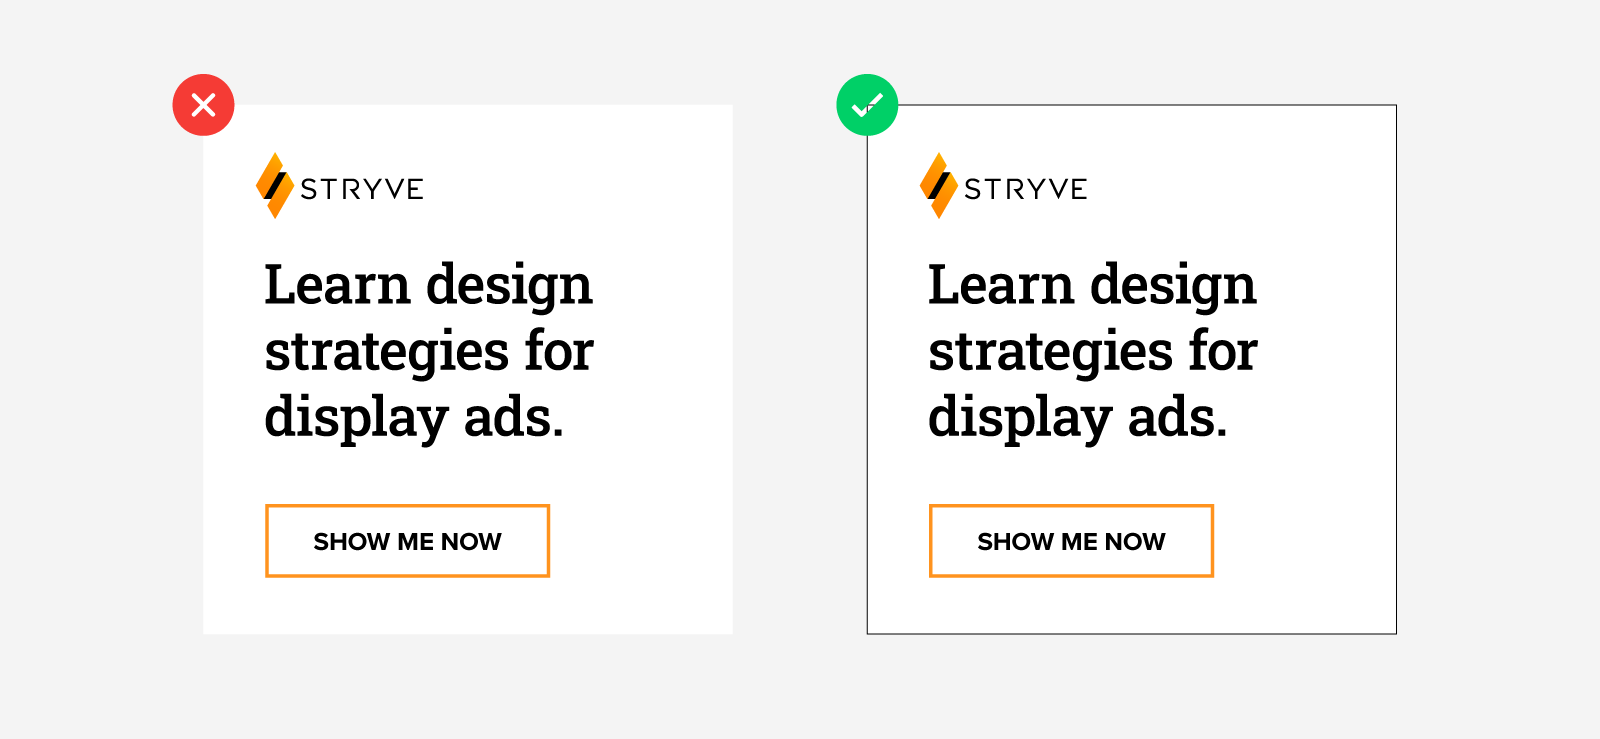 Example of using a border vs no border for white display ads.